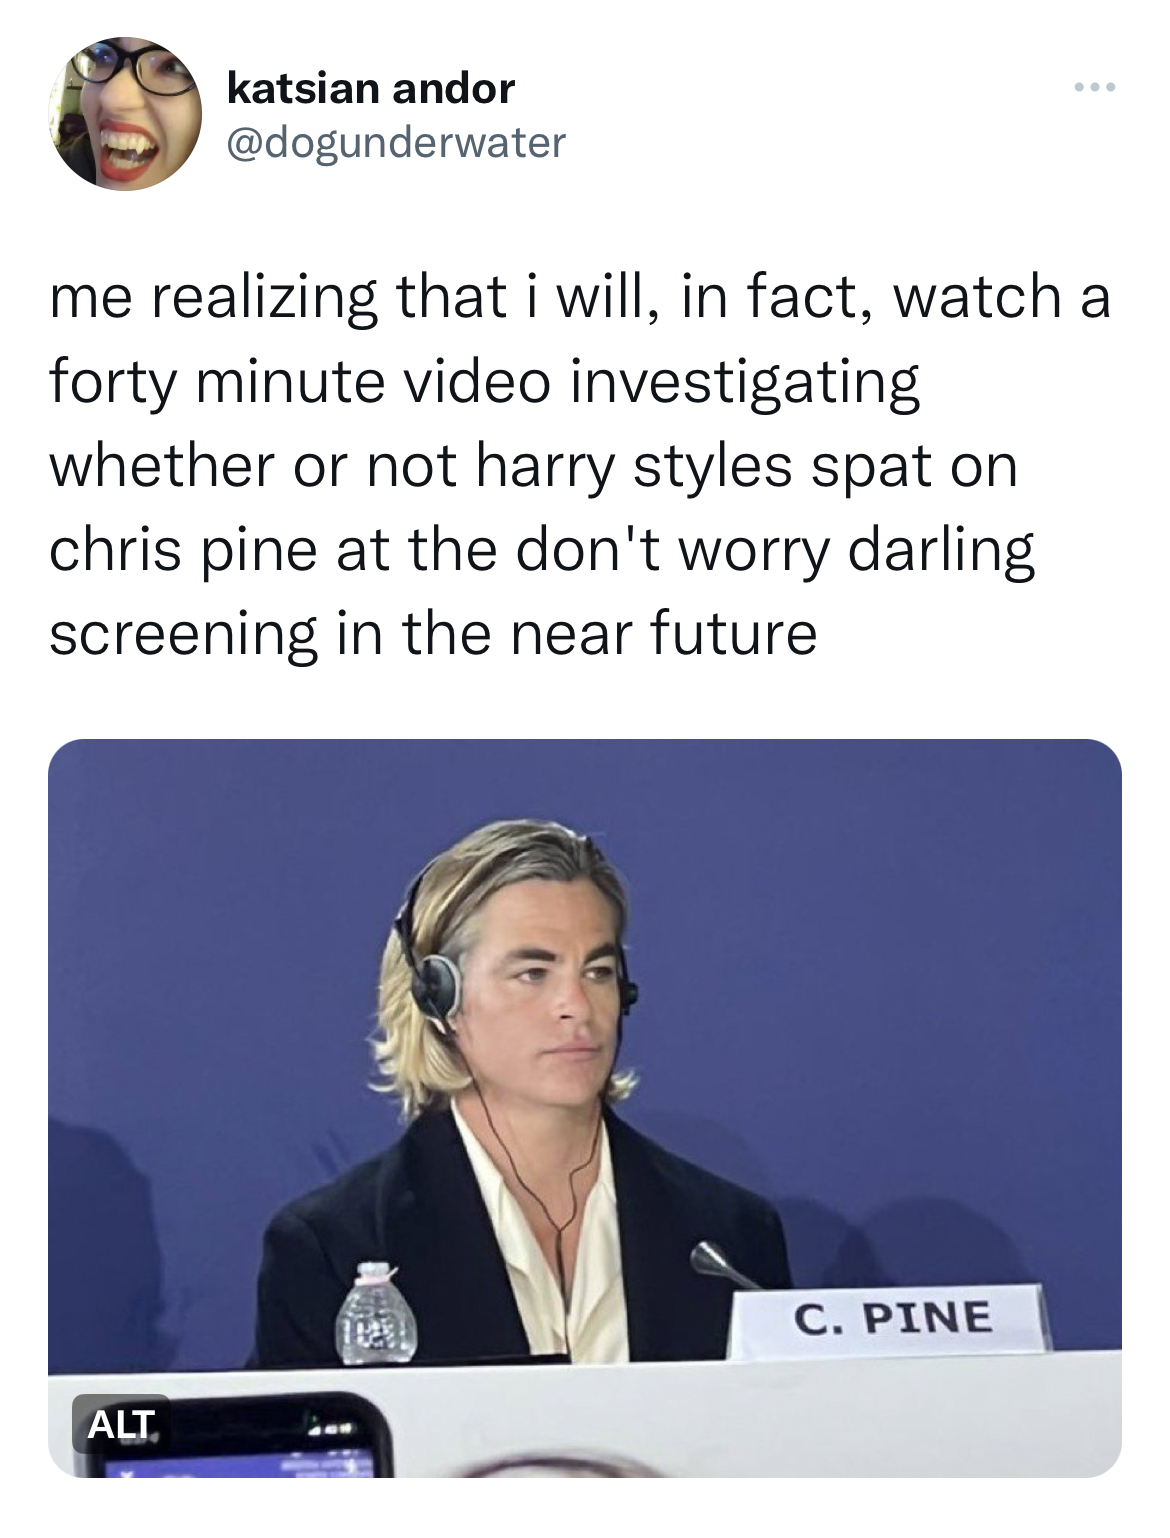 Chris Pine Venice Film Festival Memes - Don't Worry Darling - katsian andor me realizing that i will, in fact, watch a forty minute video investigating whether or not harry styles spat on chris pine at the don't worry darling screening in the near future 